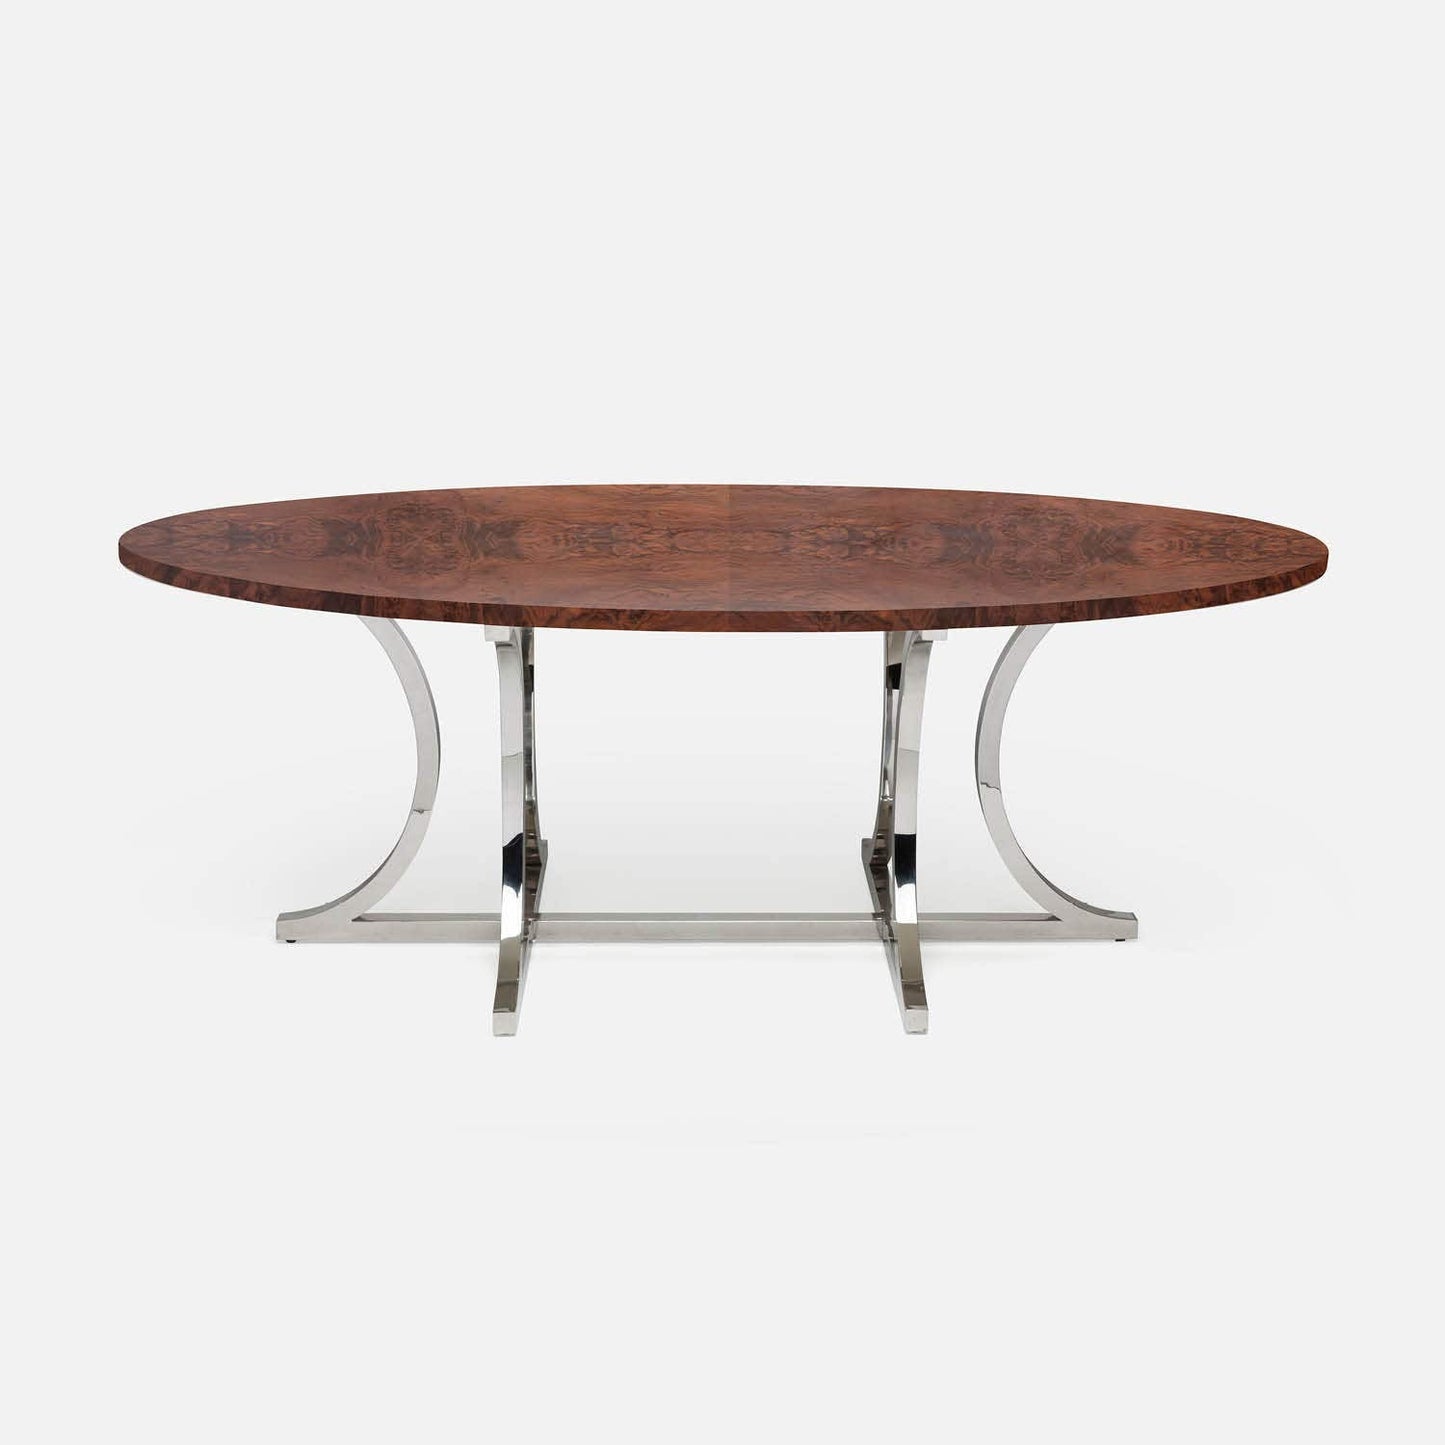 Made Goods Leighton 96" x 44" x 30" Polished Silver Steel Dinning Table With Oval Walnut Veneer Table Top